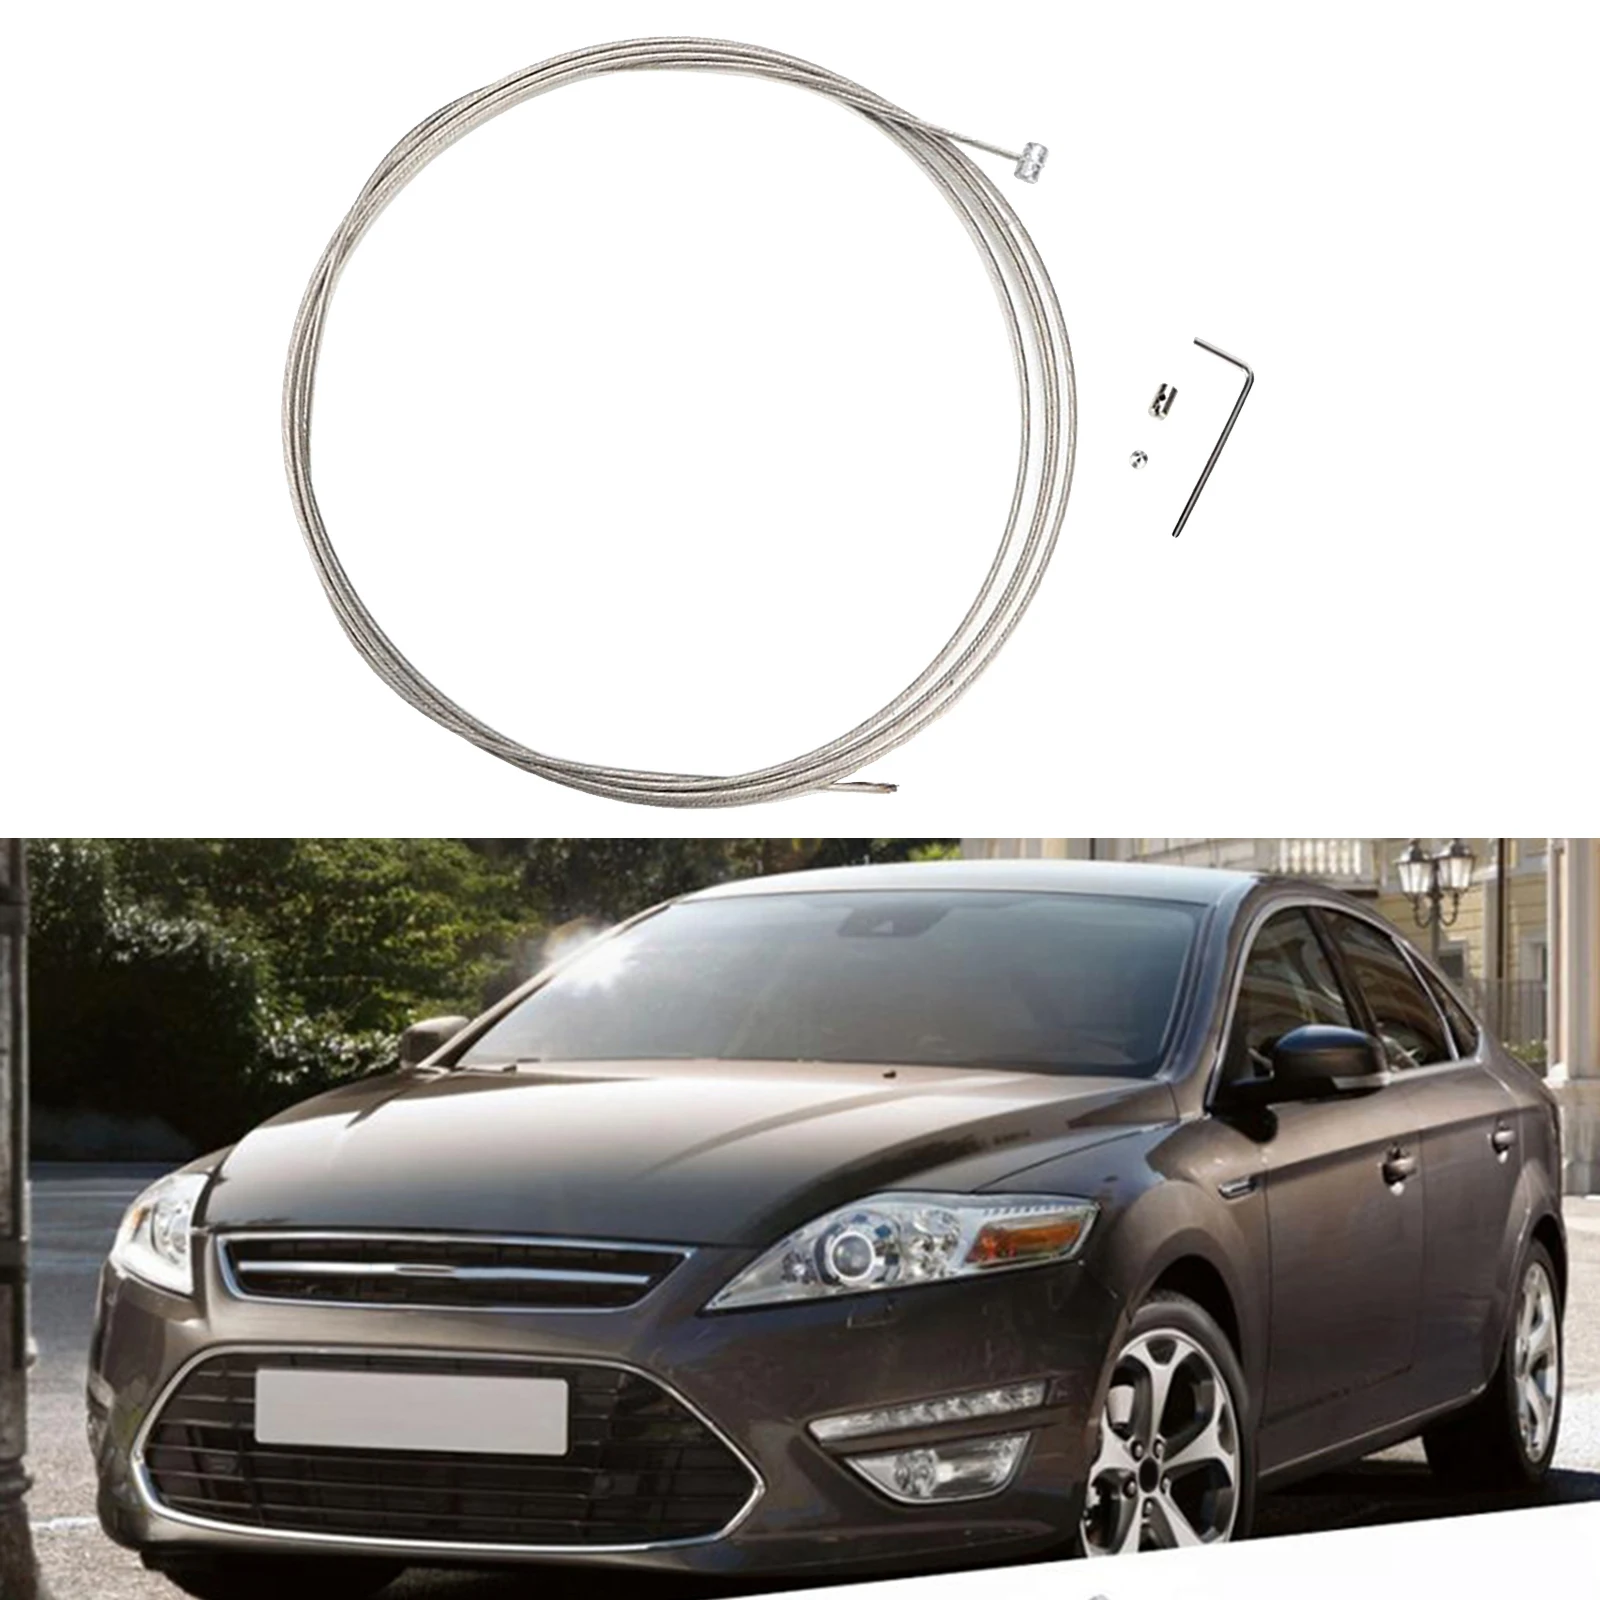 8.2ft Car Handbrake Broken Snapped Bonnet Release Cable Fix fits for Ford Mondeo MK4 2007+